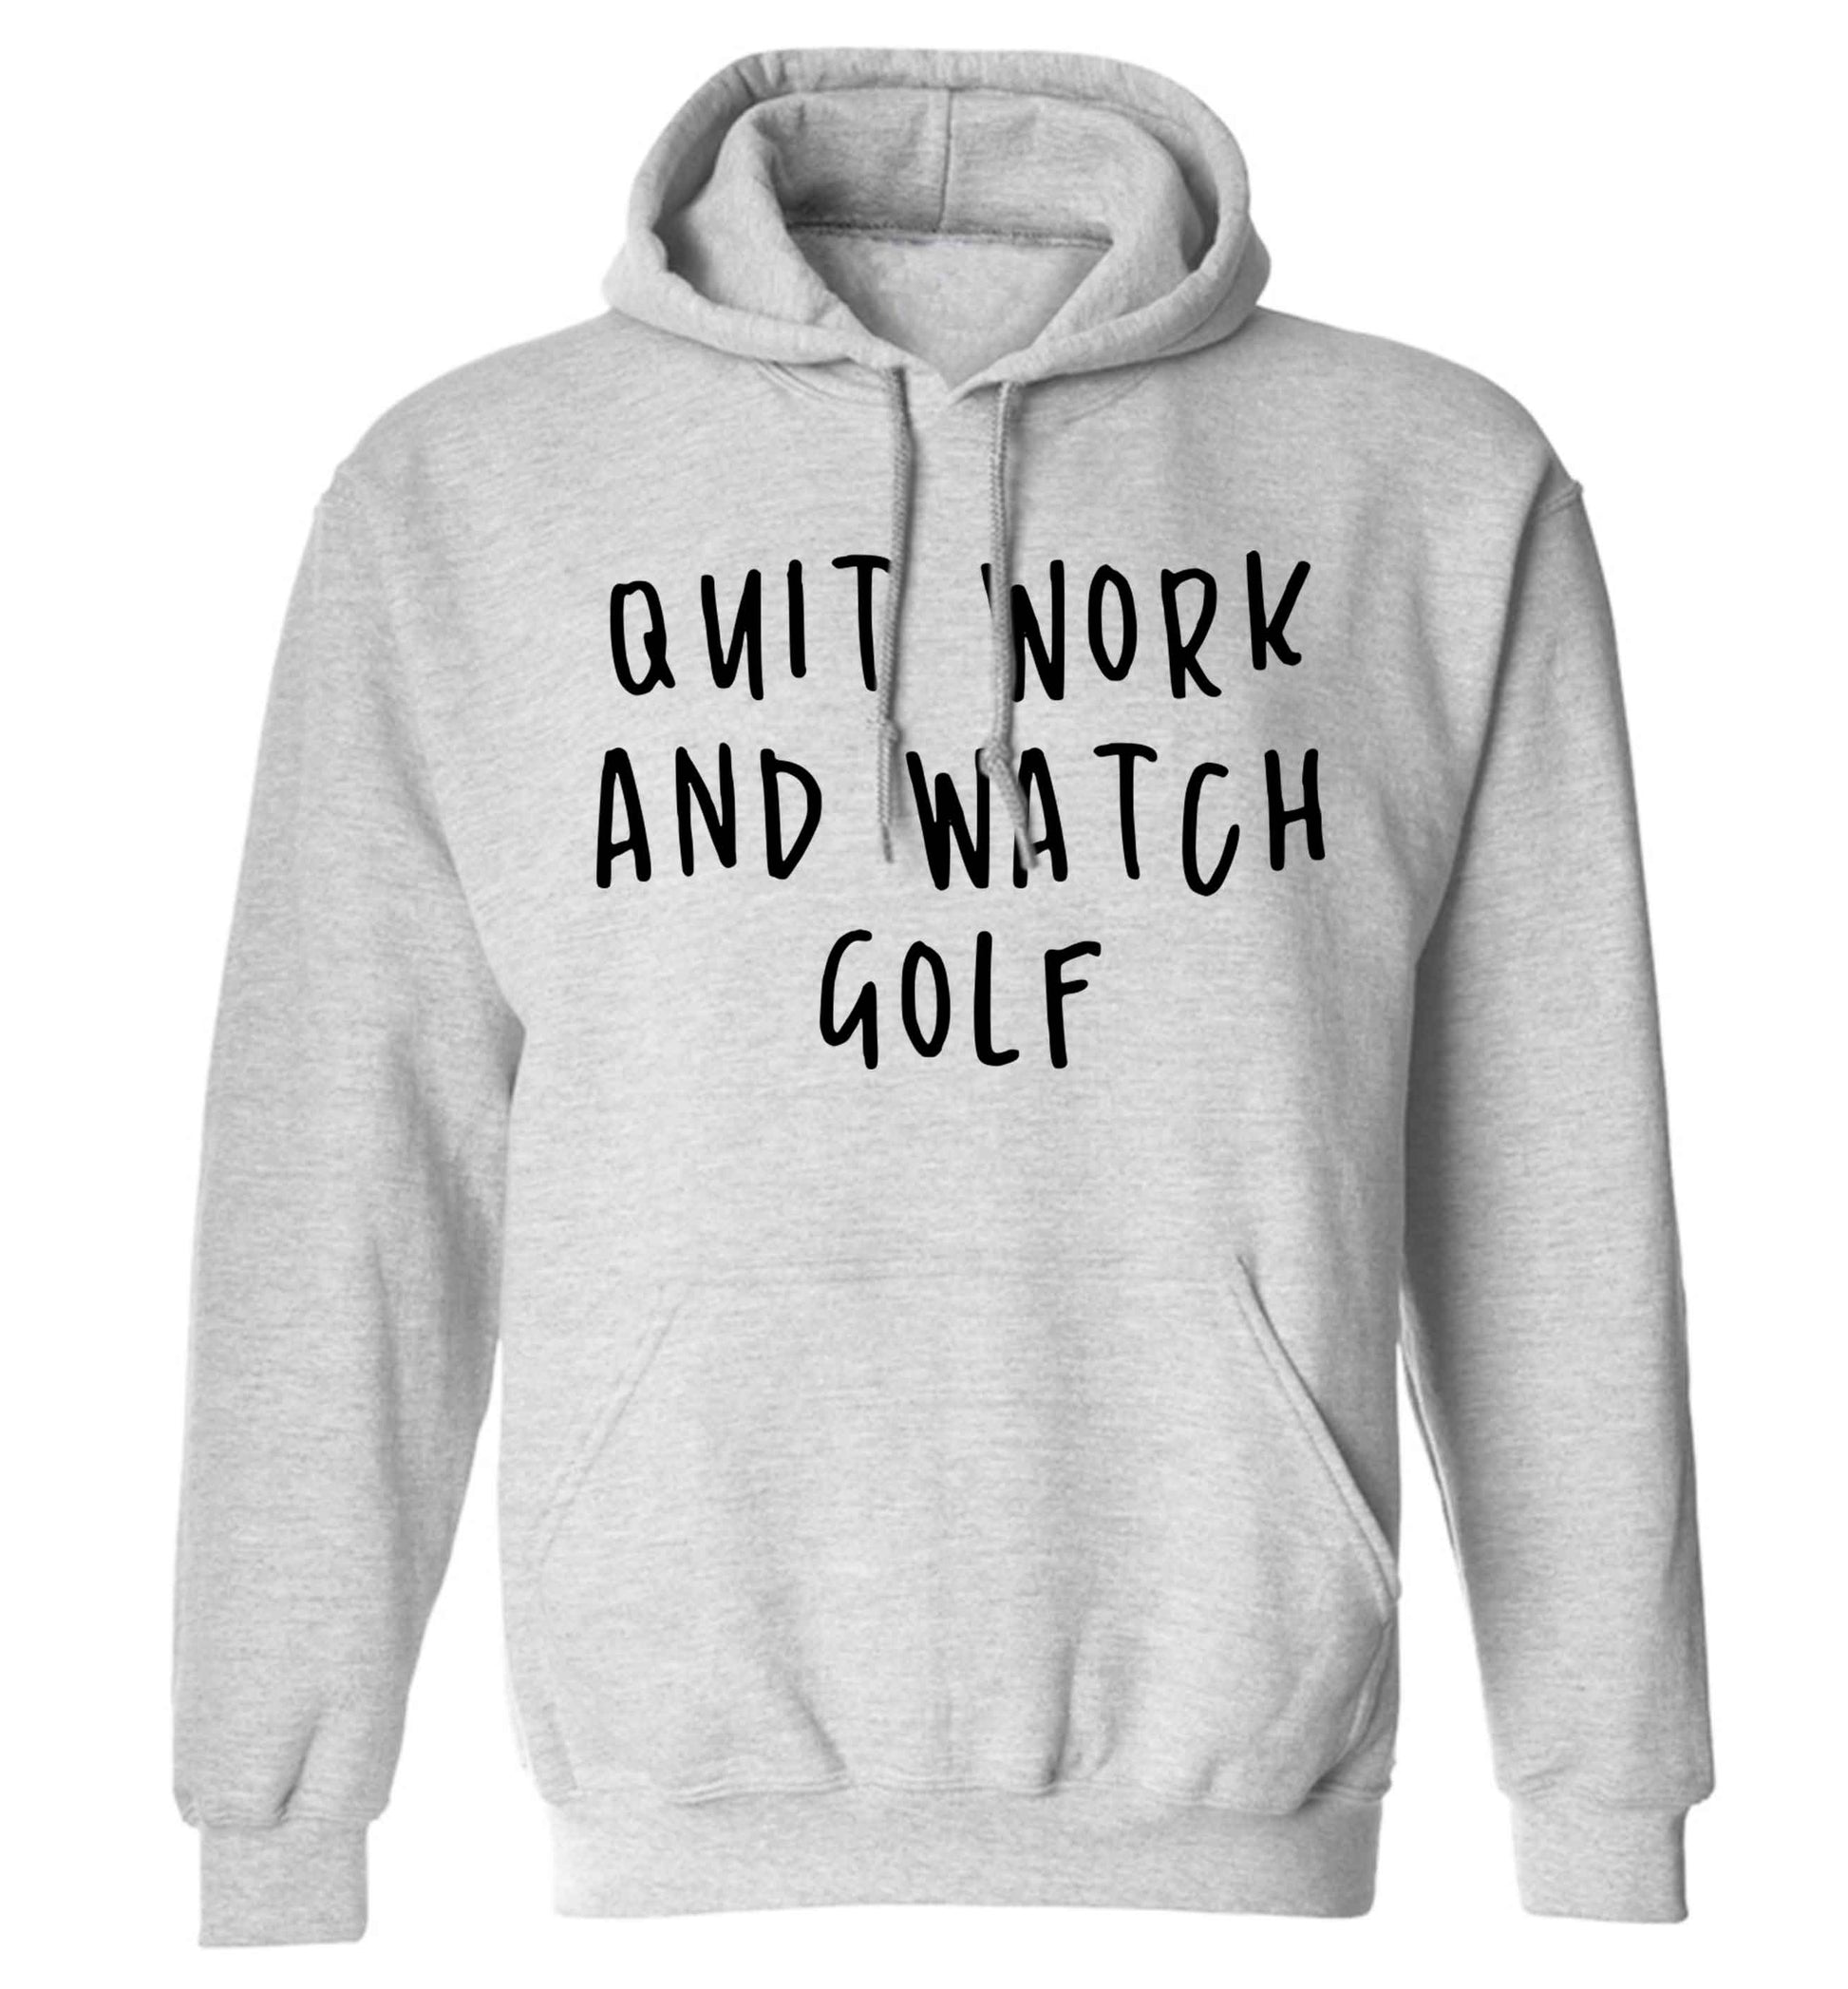 Quit work and watch golf adults unisex grey hoodie 2XL